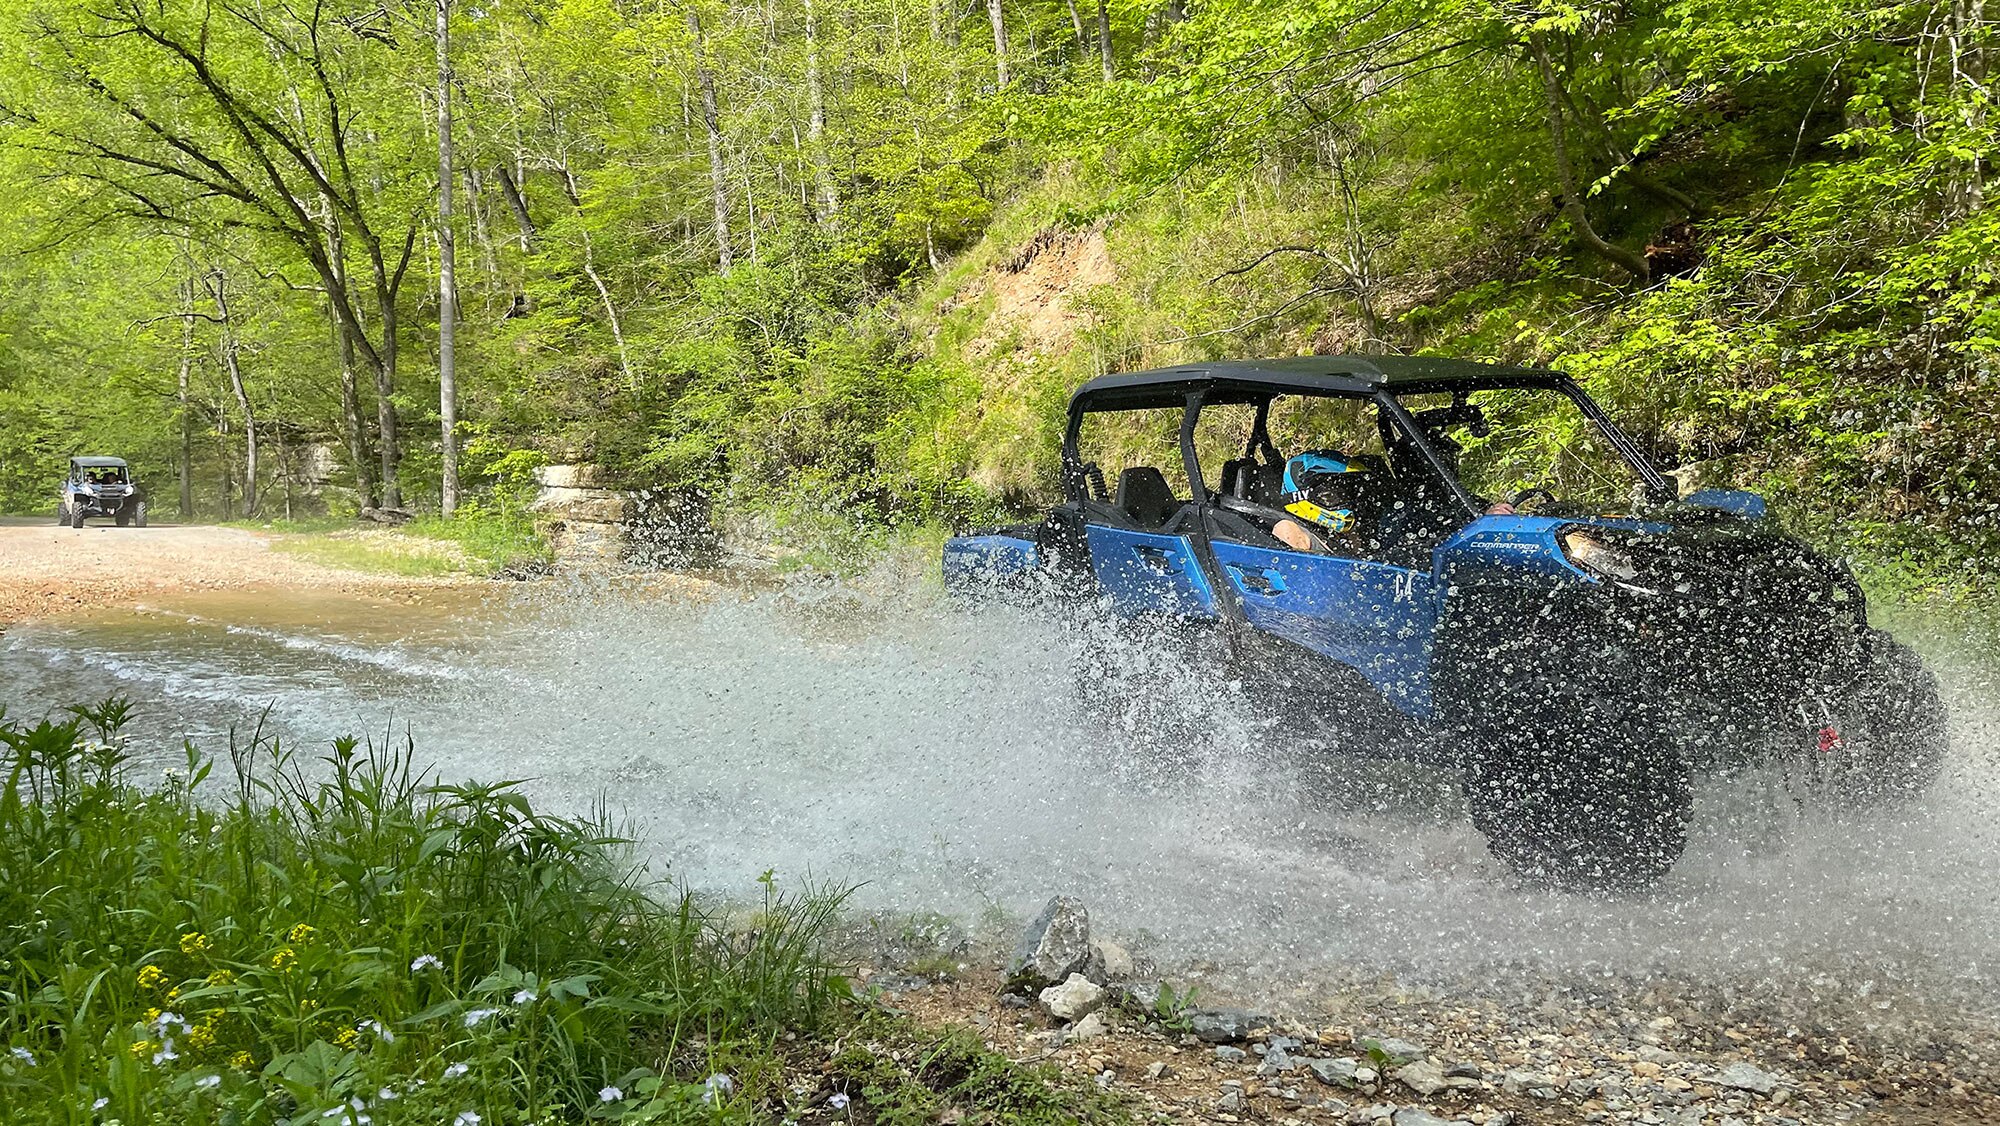 People riding in water with a side-by-side vehicle